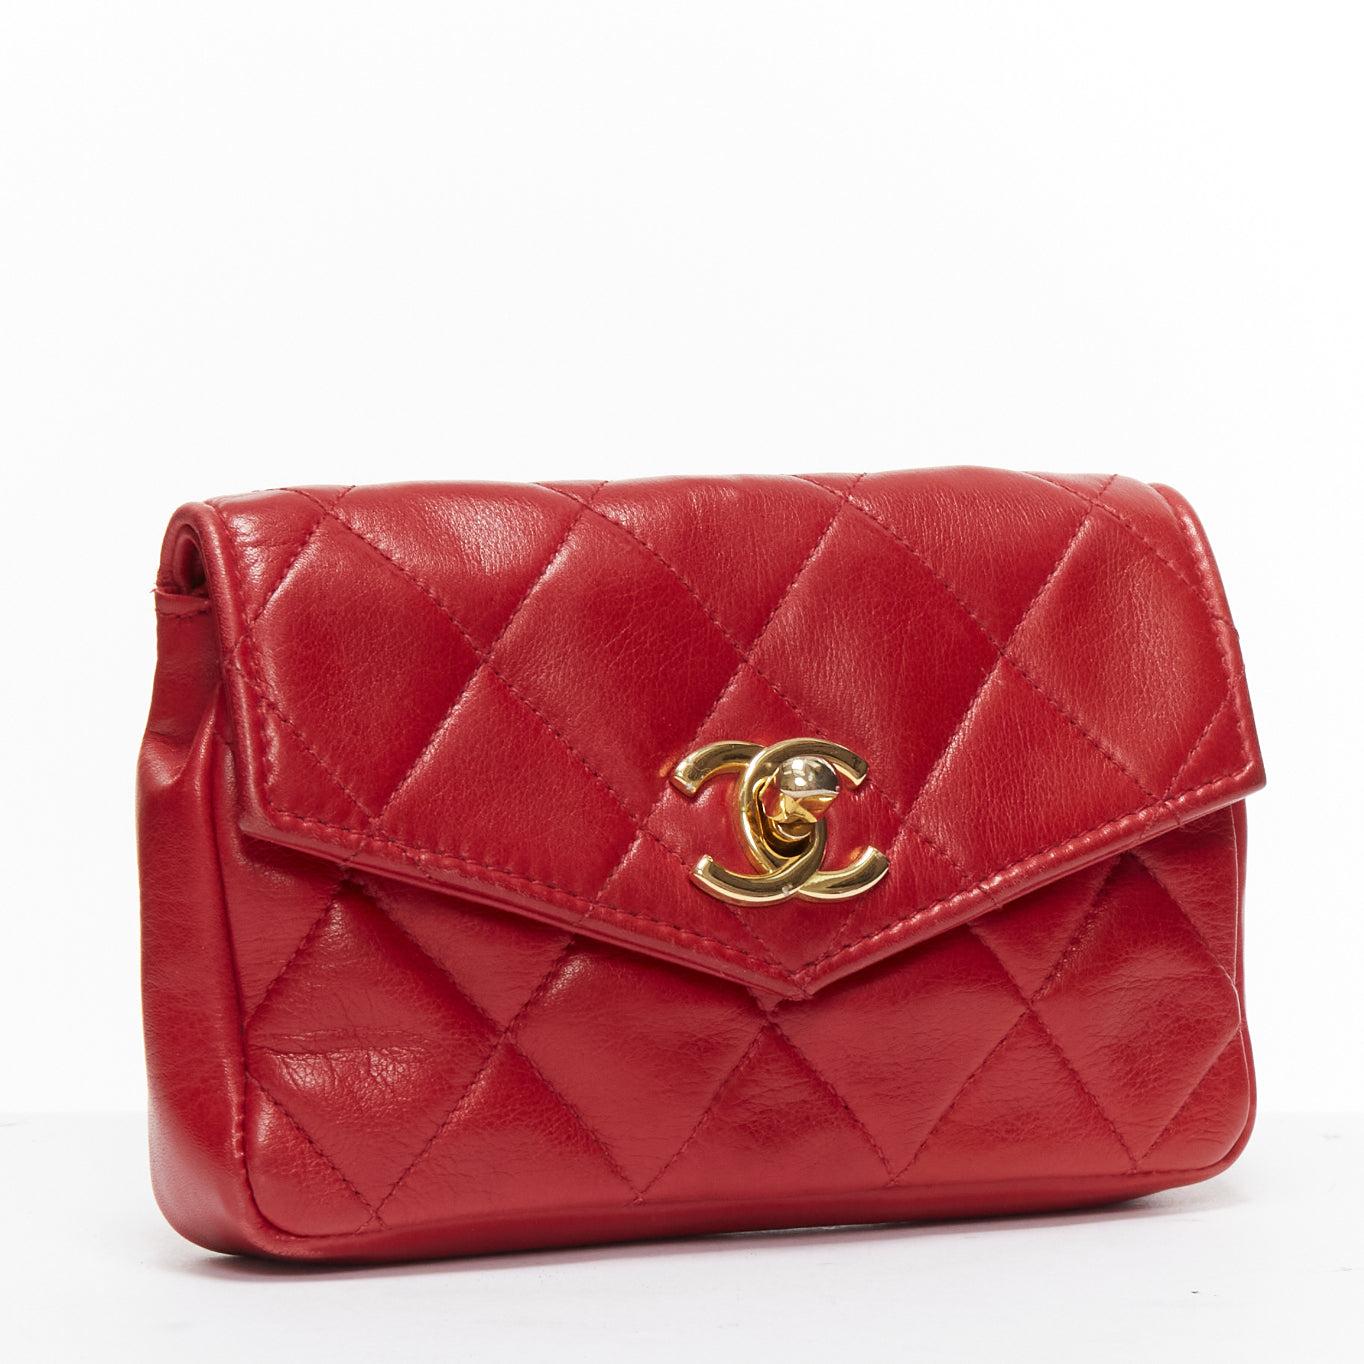 CHANEL Vintage red lambskin matelasse CC turnlock belt bag pouch
Reference: GIYG/A00284
Brand: Chanel
Designer: Karl Lagerfeld
Collection: Circa 1990's
Material: Leather, Metal
Color: Red, Gold
Pattern: Solid
Closure: Turnlock
Lining: Red